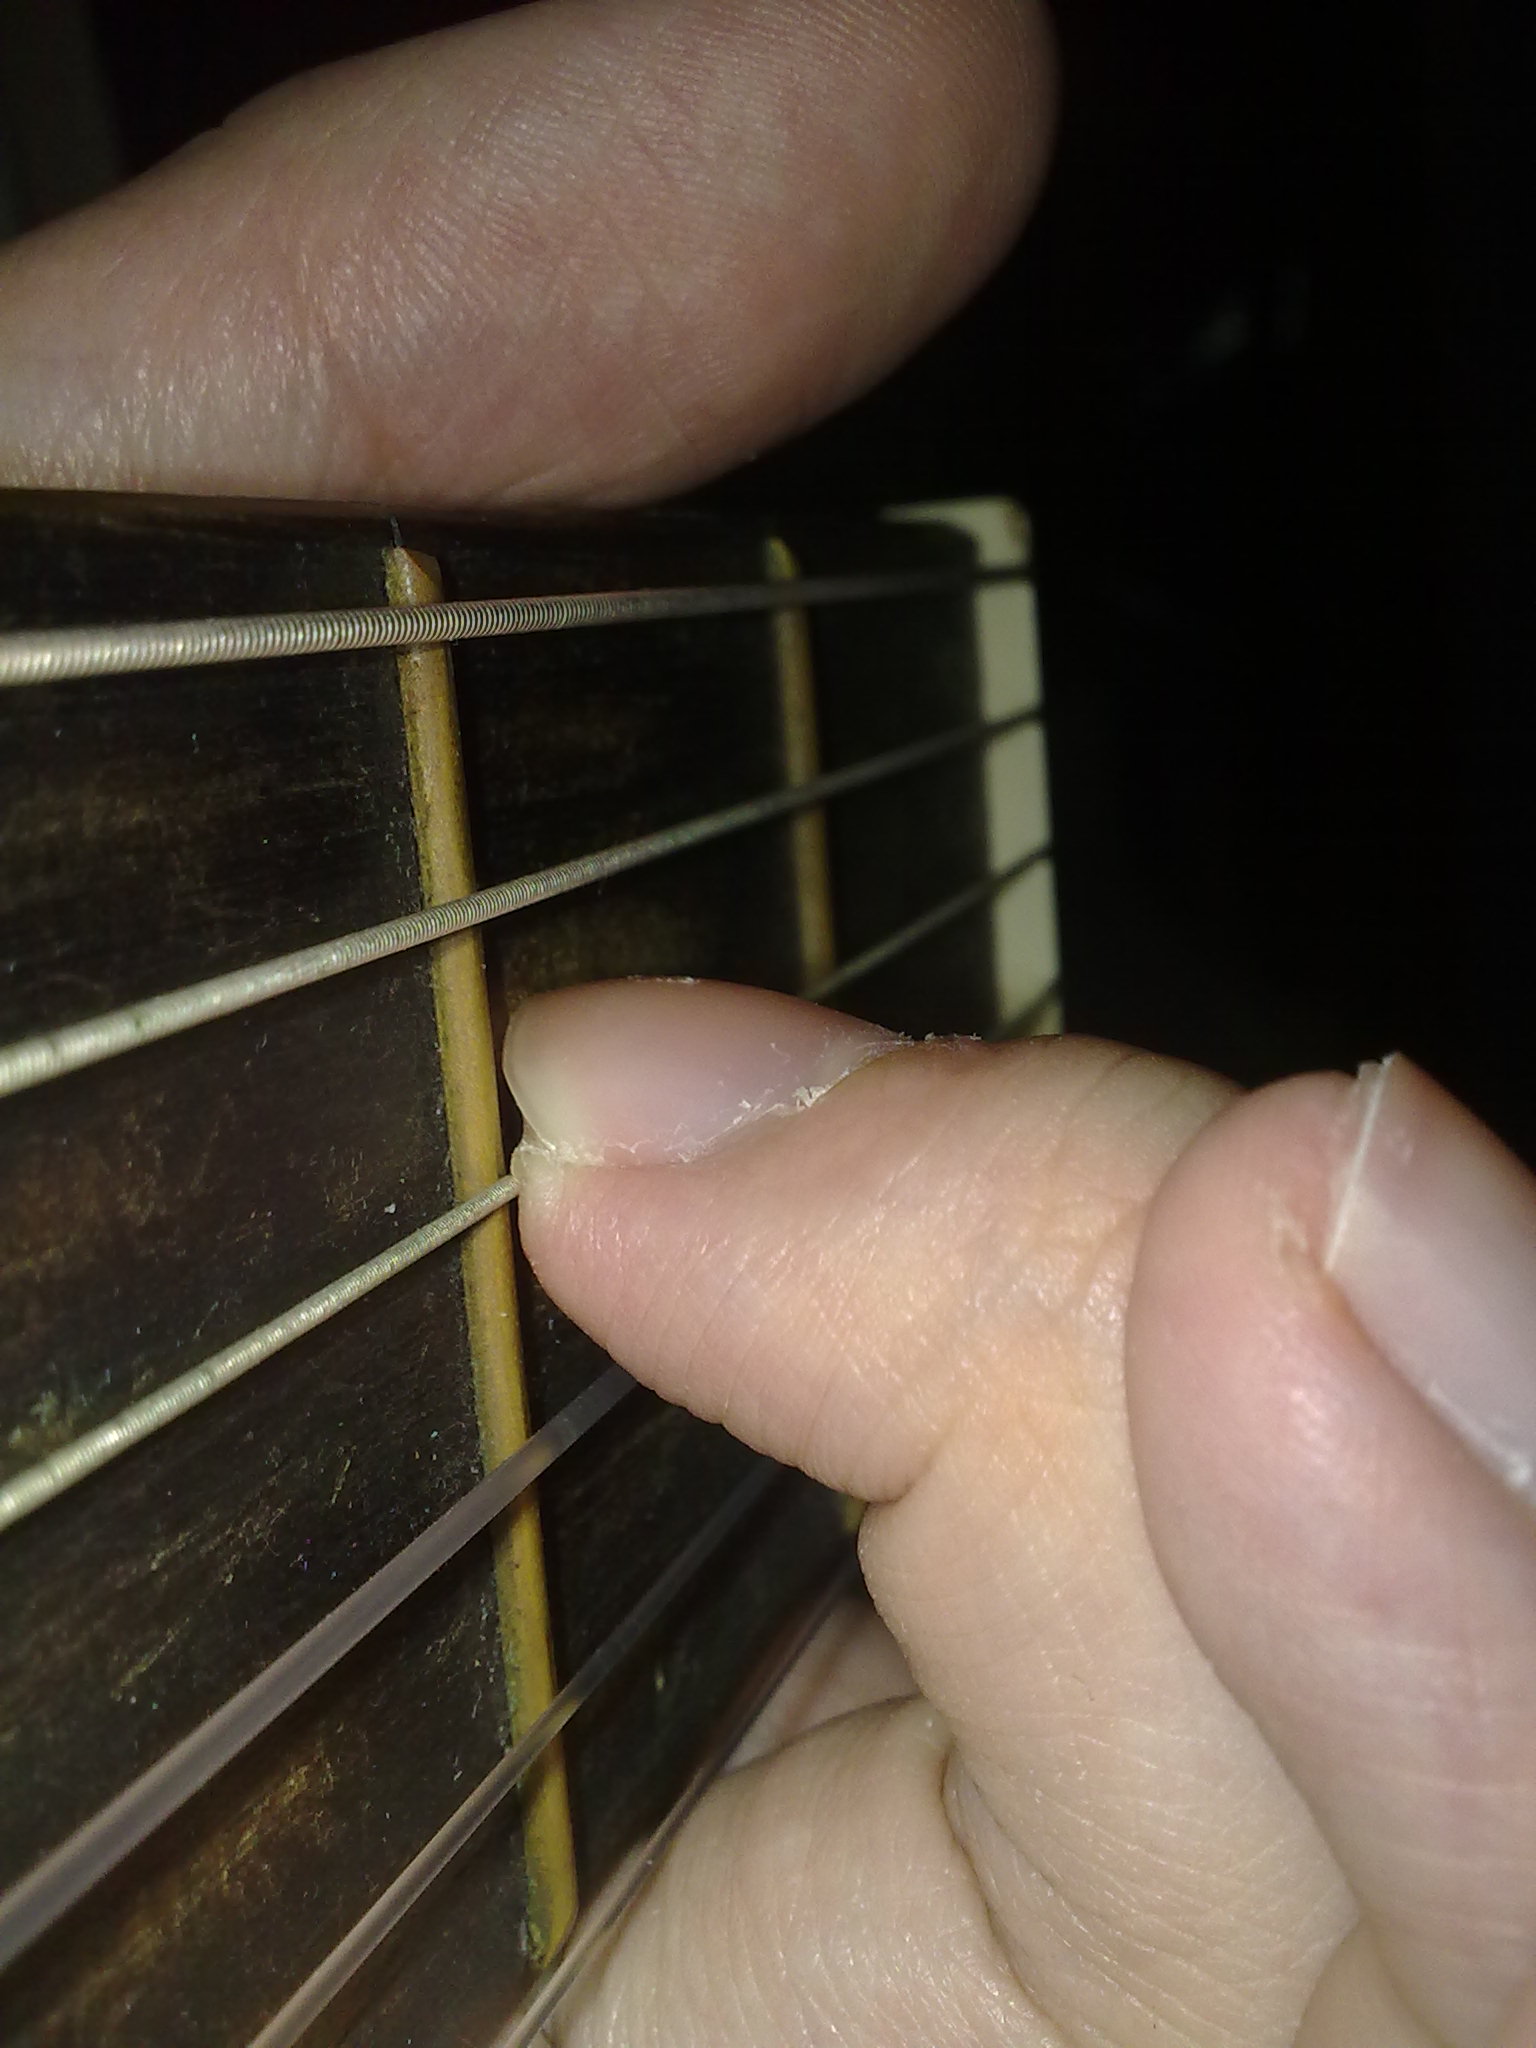 Guitar how to stretch nails at home